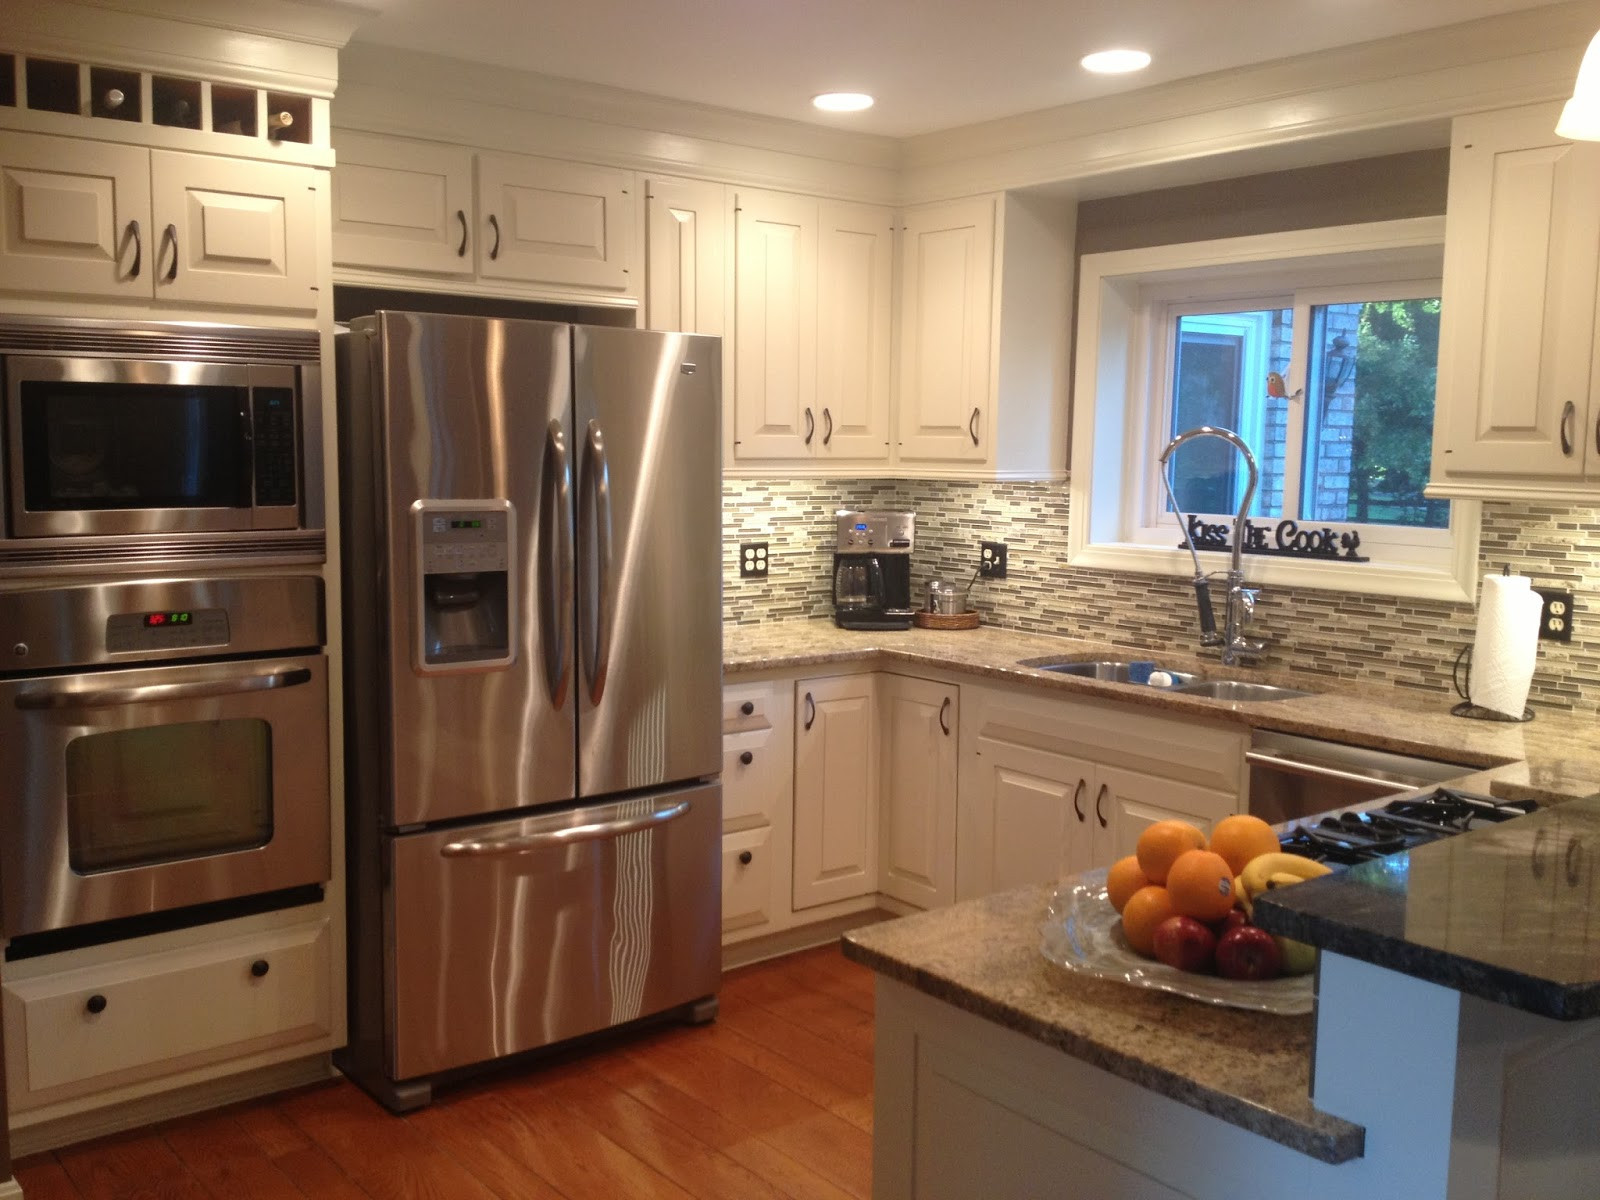 Kitchen Remodeling Budgets
 Four Seasons Style The NEW kitchen remodel on a bud